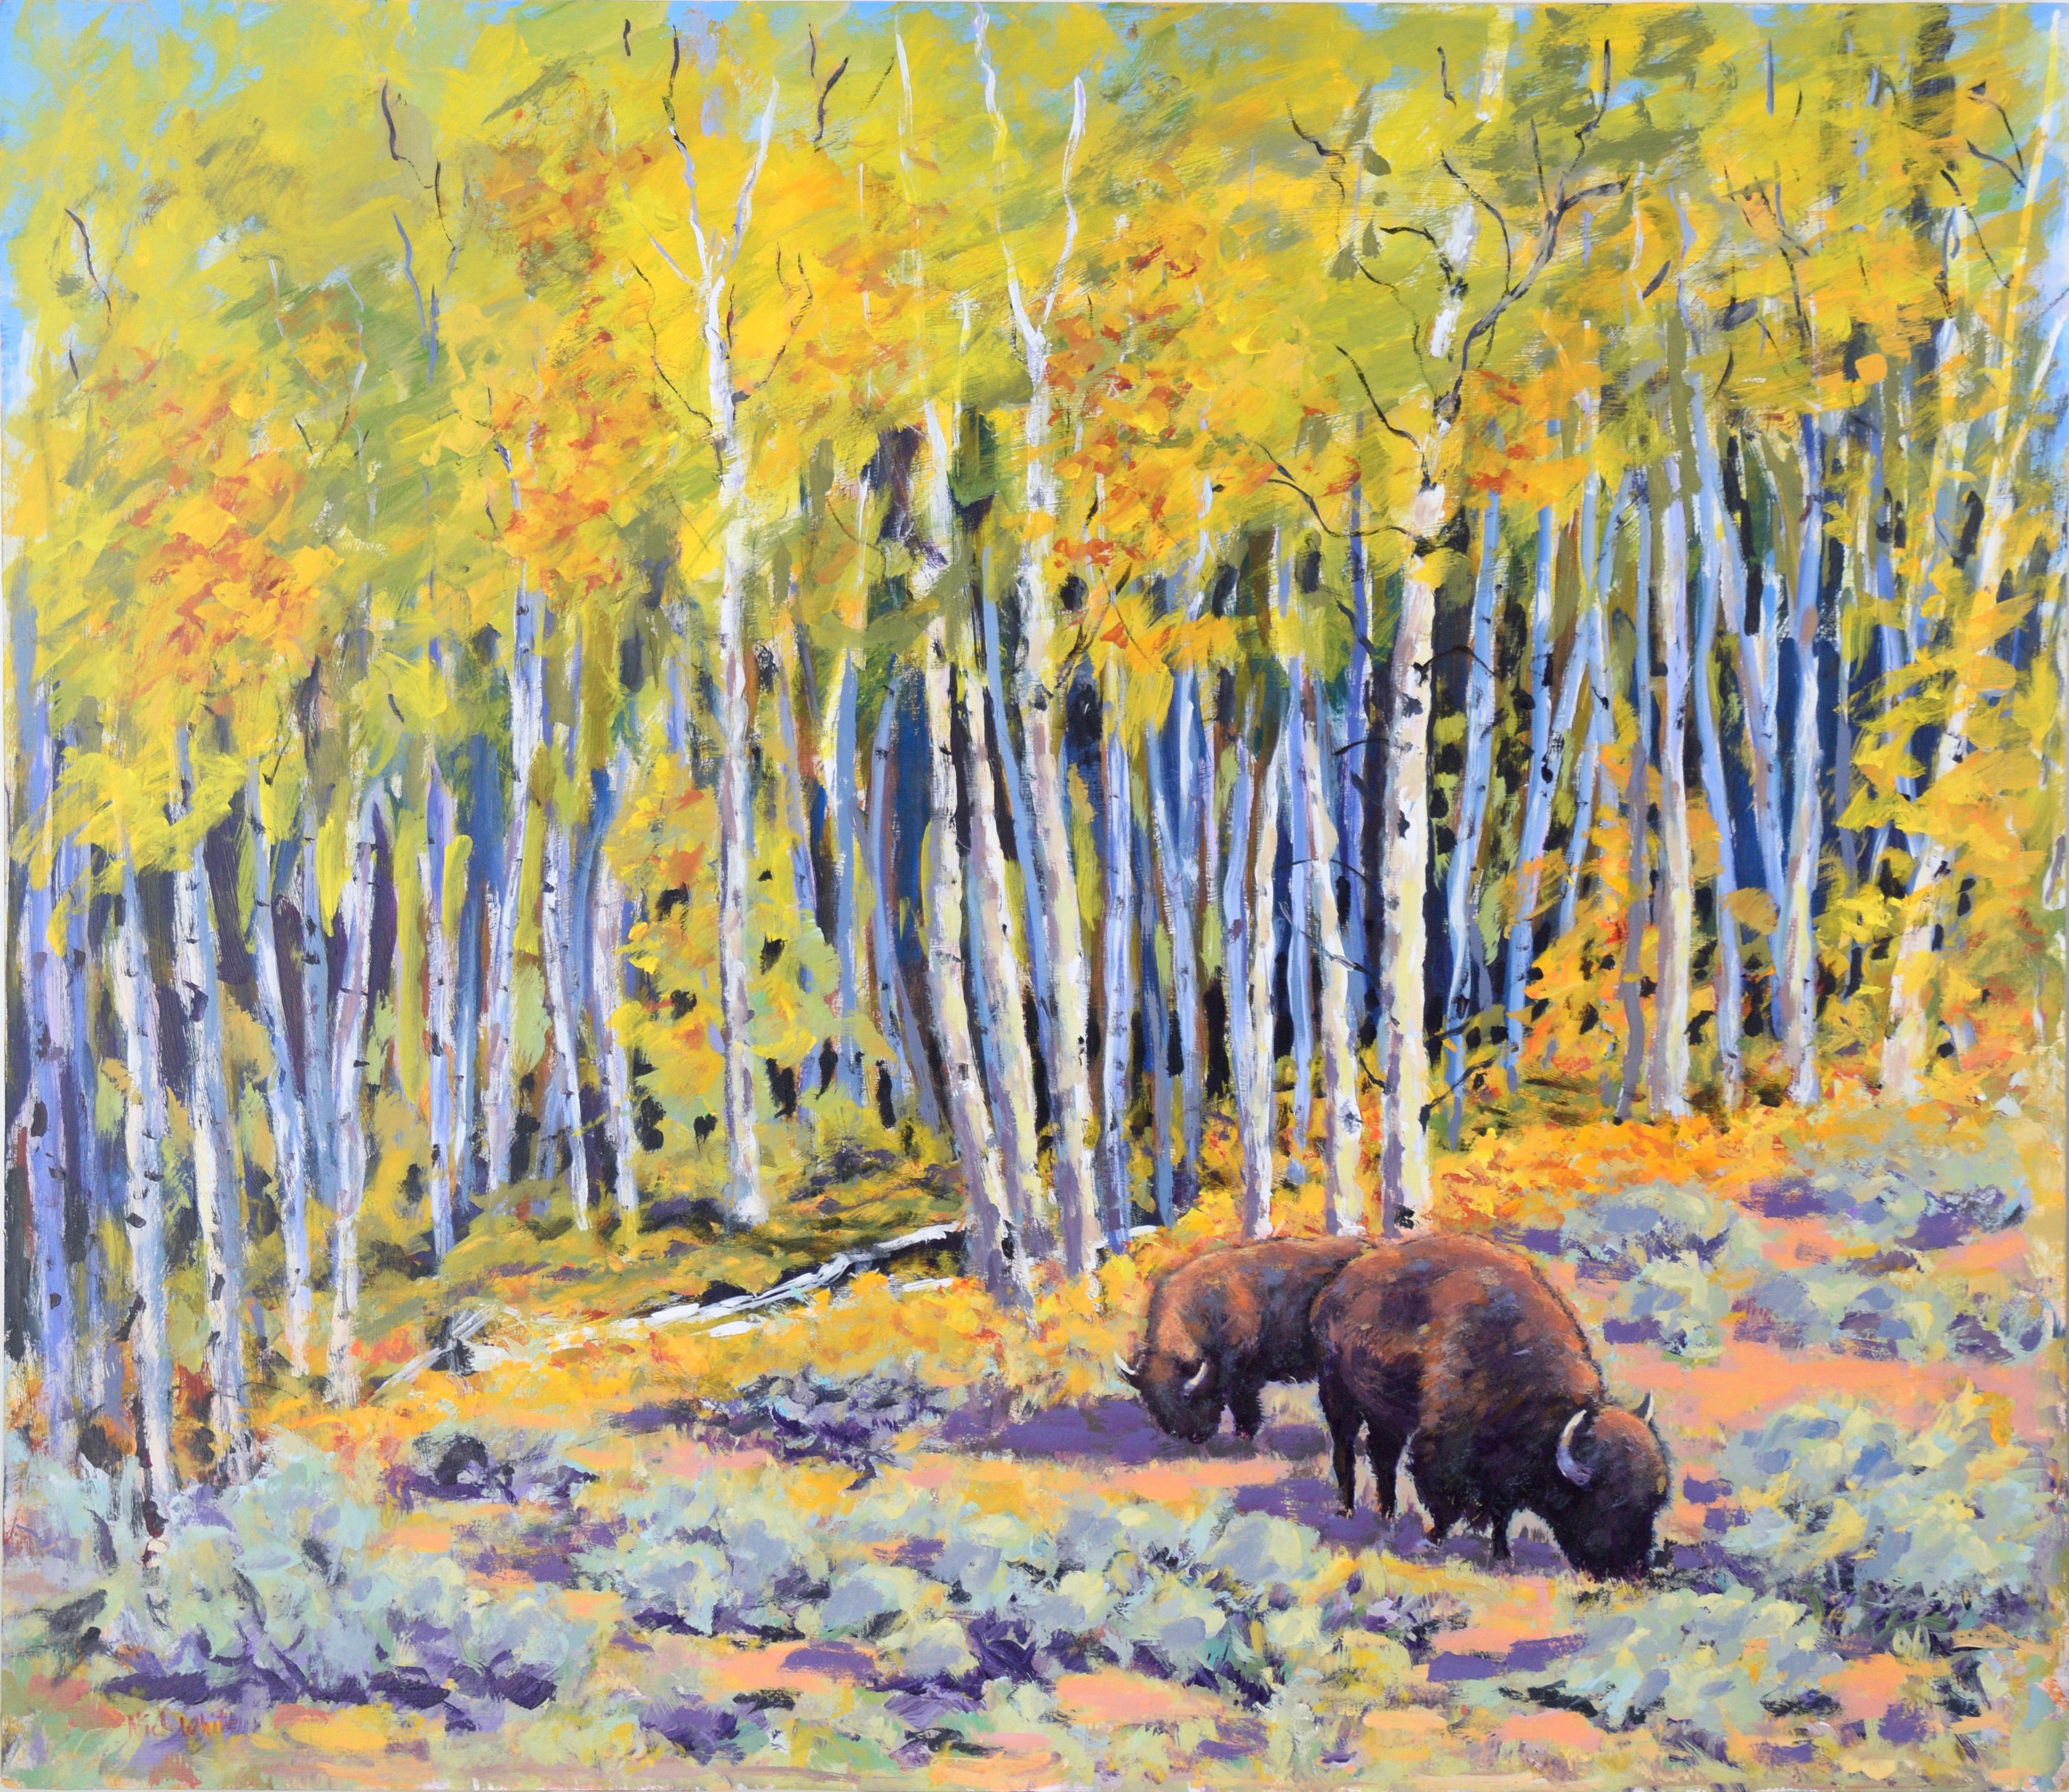 Nick White Landscape Painting - Bison in the Aspen Forest - Western Plein Aire Landscape in Acrylic on Board